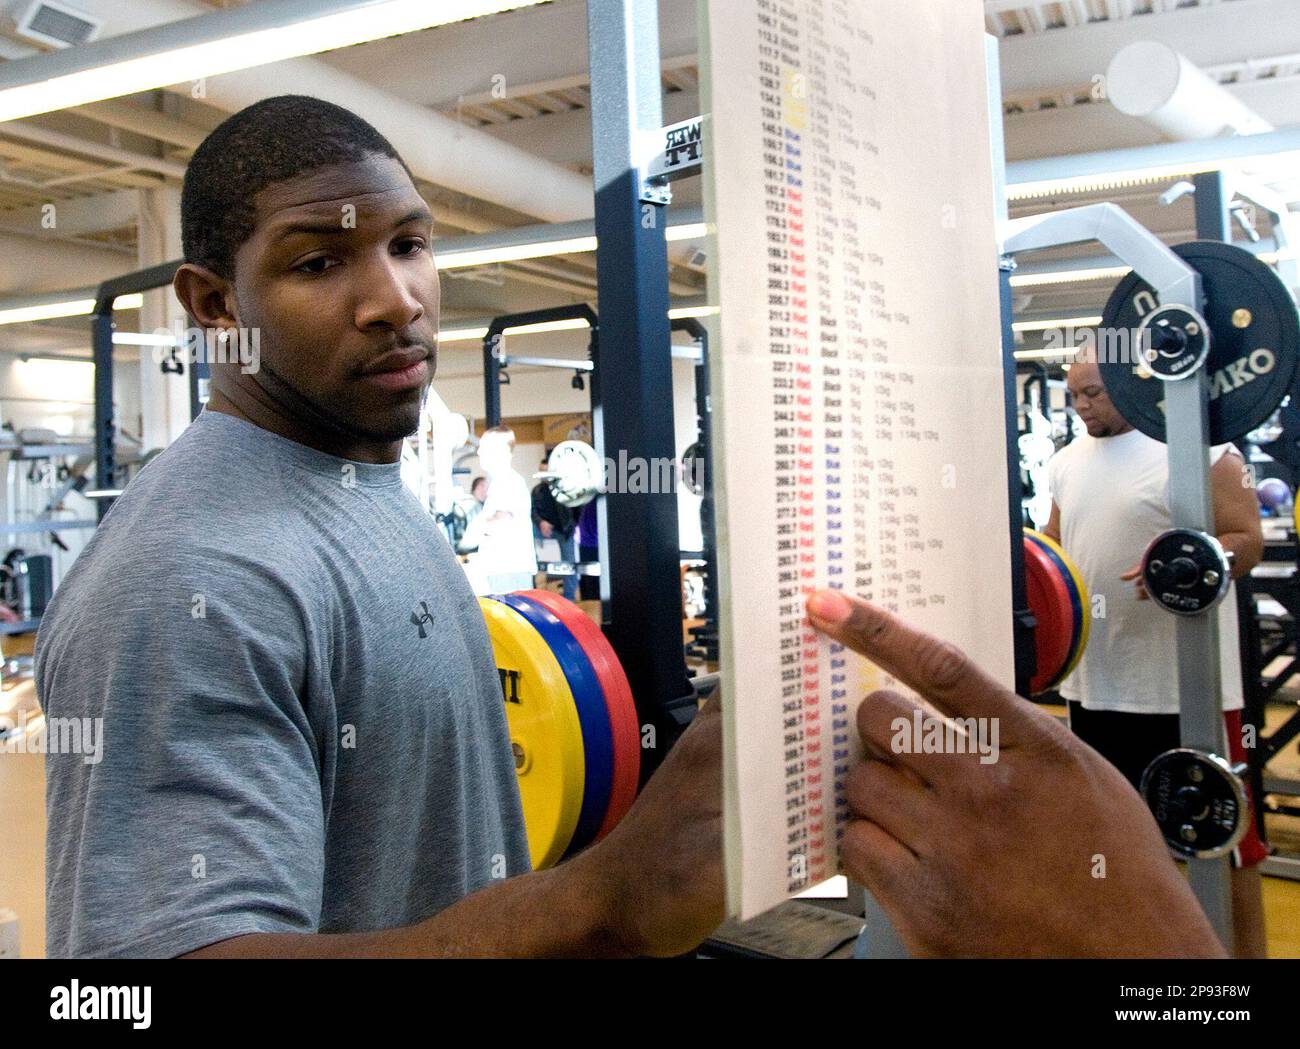 JMU alumni and Philadelphia Eagles linebacker Akeem Jordan checks the weight  conversion chart to determing the correct configuration of the weights  during his workout at the James Madison athletic complex in Harrisonburg,